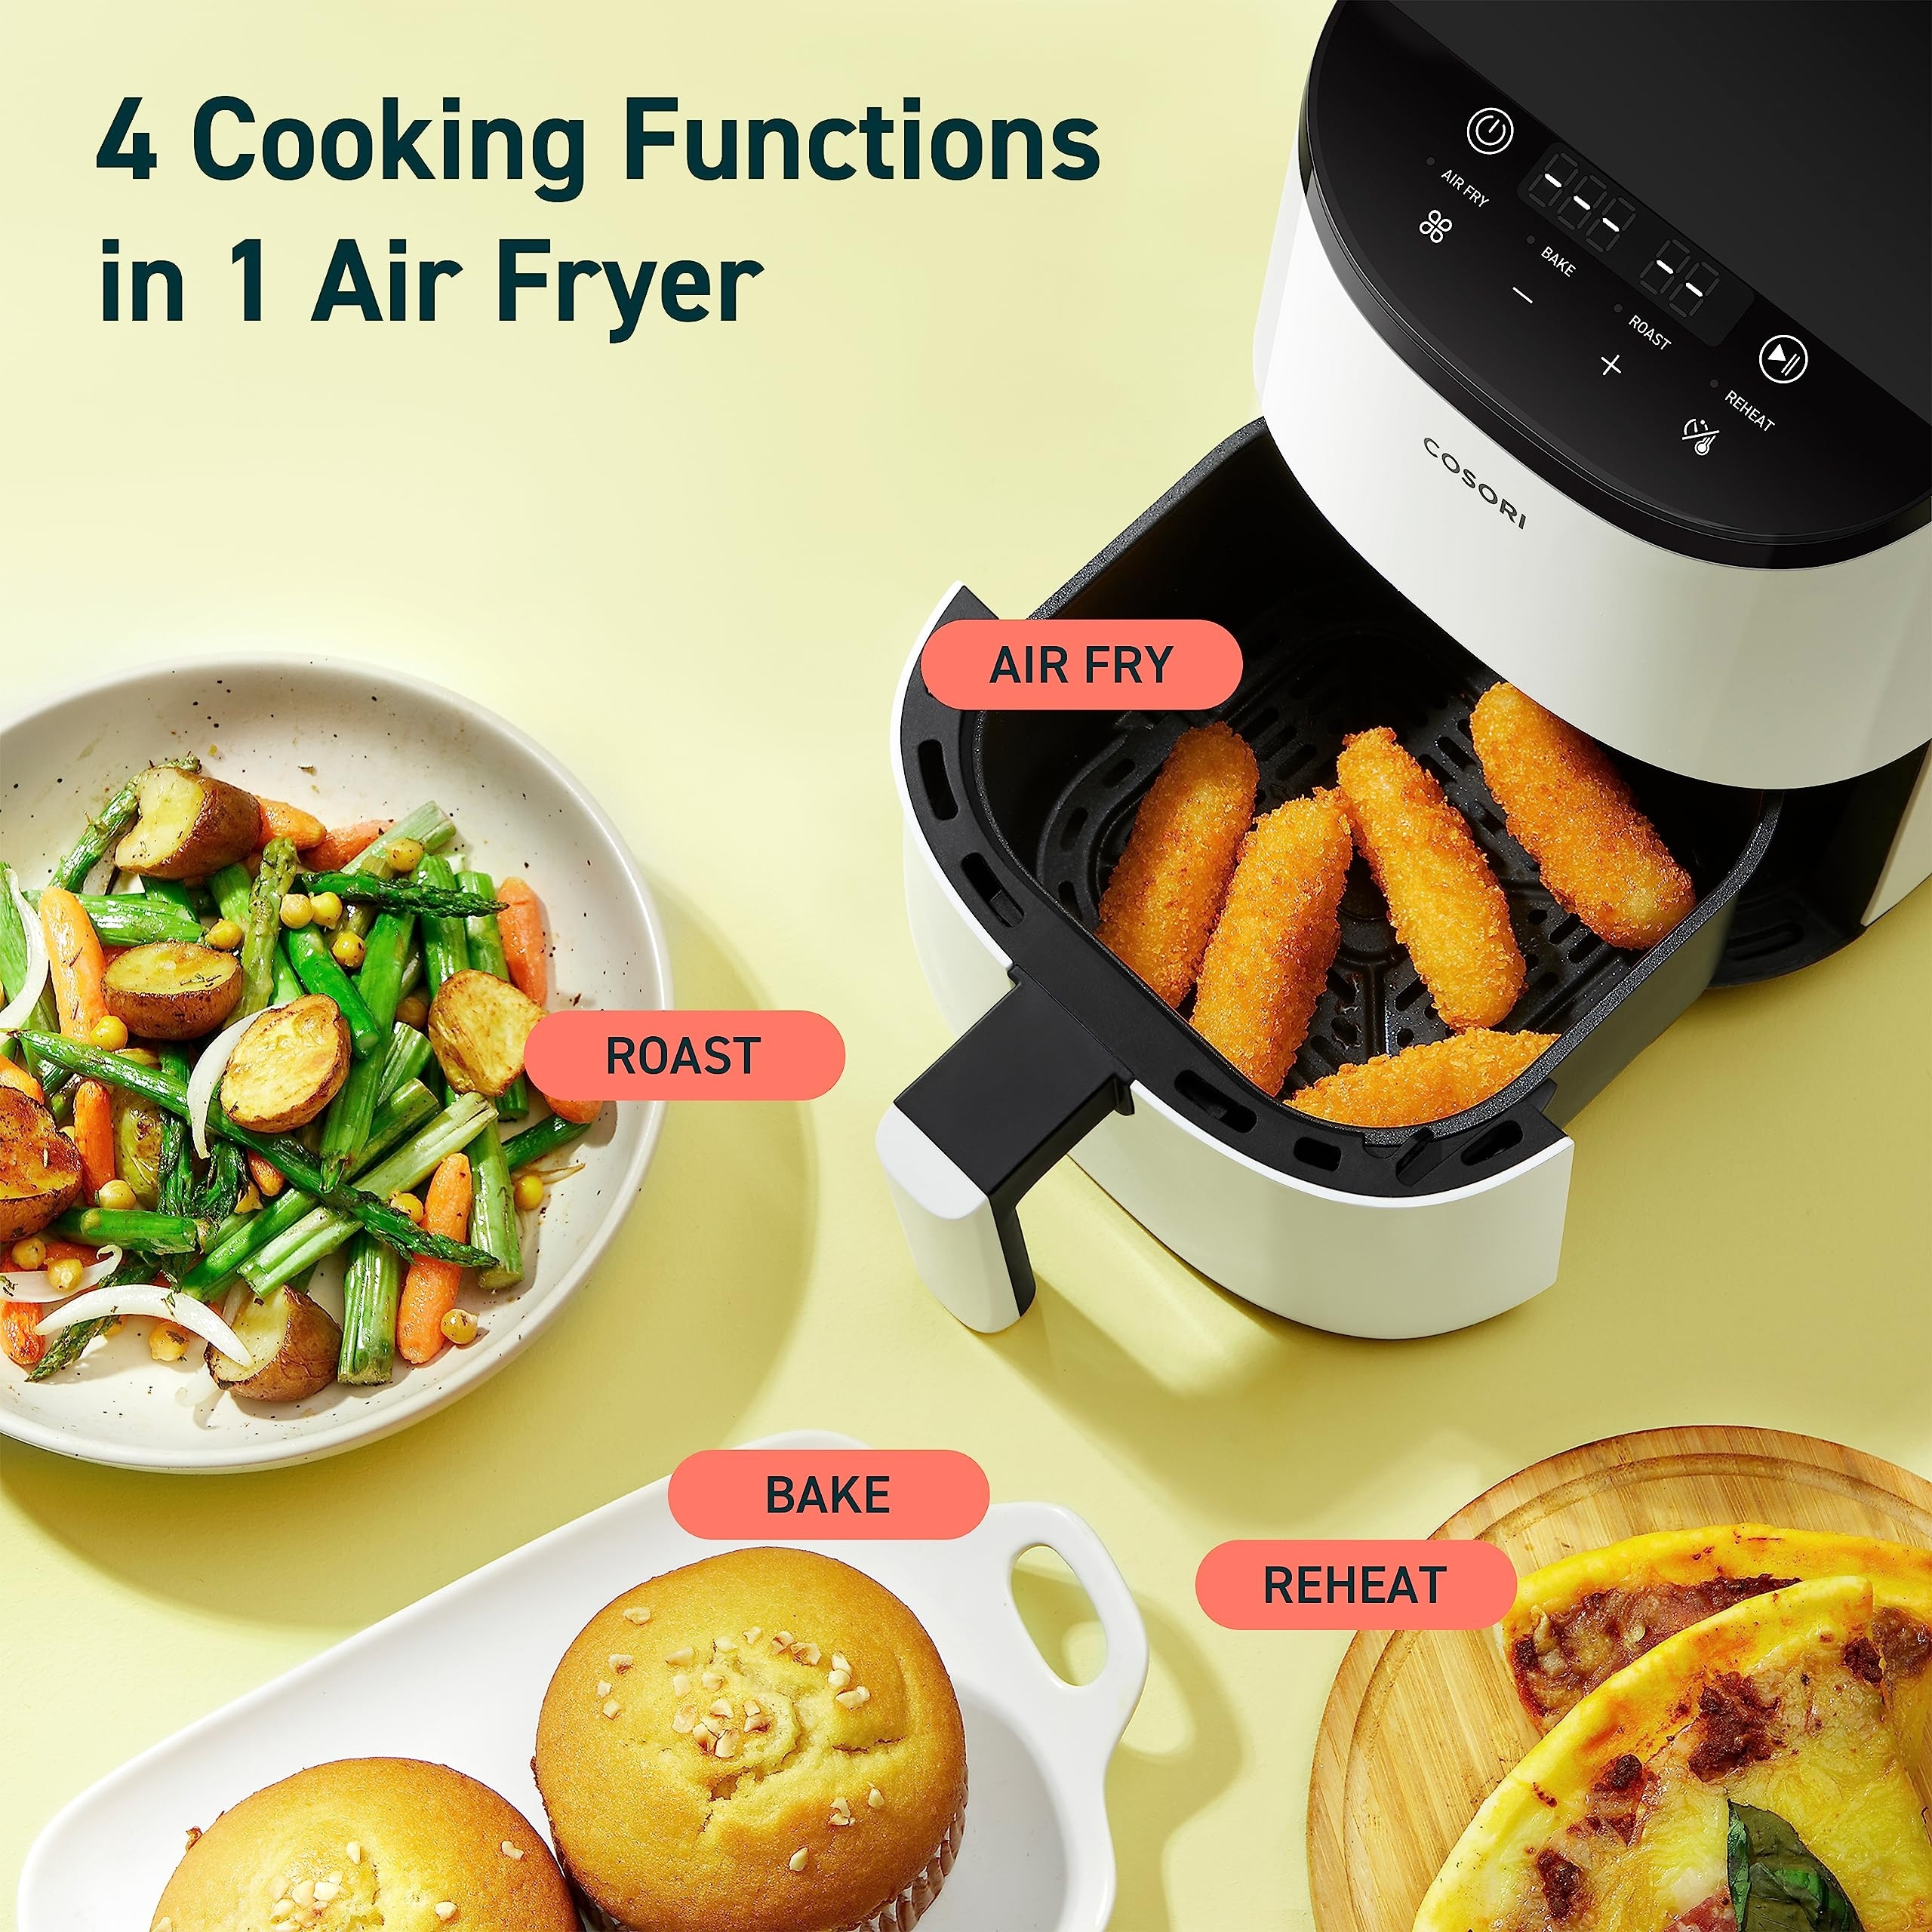 https://ak1.ostkcdn.com/images/products/is/images/direct/1c6a72d38188bb59d3b0b61dd638e191f662e901/Small-Air-Fryer-Oven-2.1-Qt%2C-4-in-1-Mini-Airfryer%2C-Bake%2C-Roast%2C-Reheat%2C-Space-saving-%26-Low-noise%2C-Nonstick-and-Dishwasher.jpg